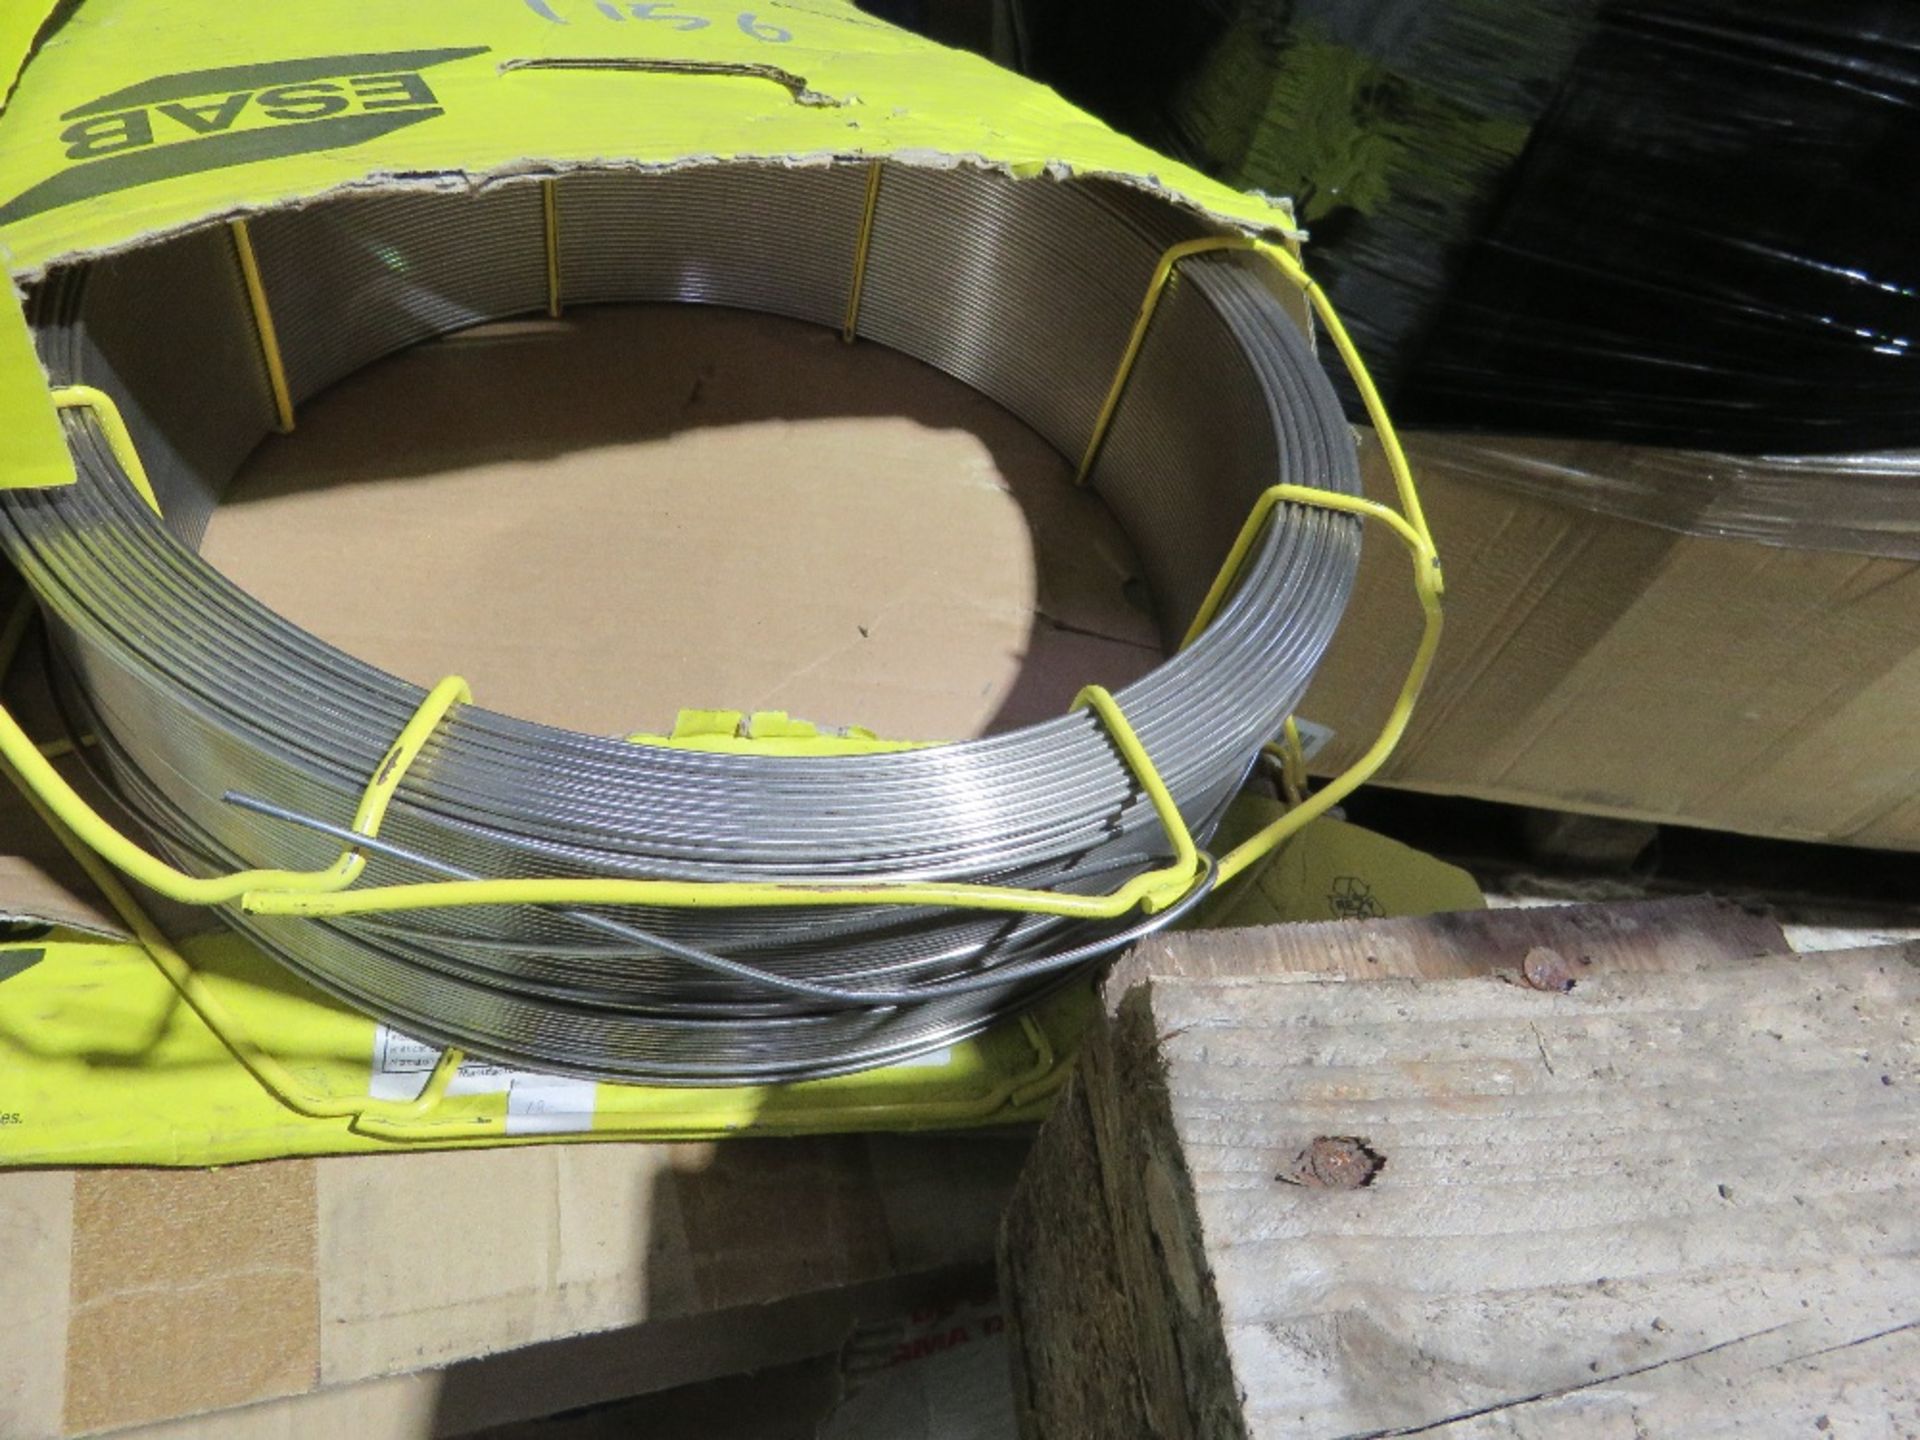 11NO ROLLS OF MIG WELDING WIRE, 2.4MM GUAGE. MAINLY ESAB AND METRODE BRAND, SOURCED FROM WORKSHOP C - Bild 3 aus 5